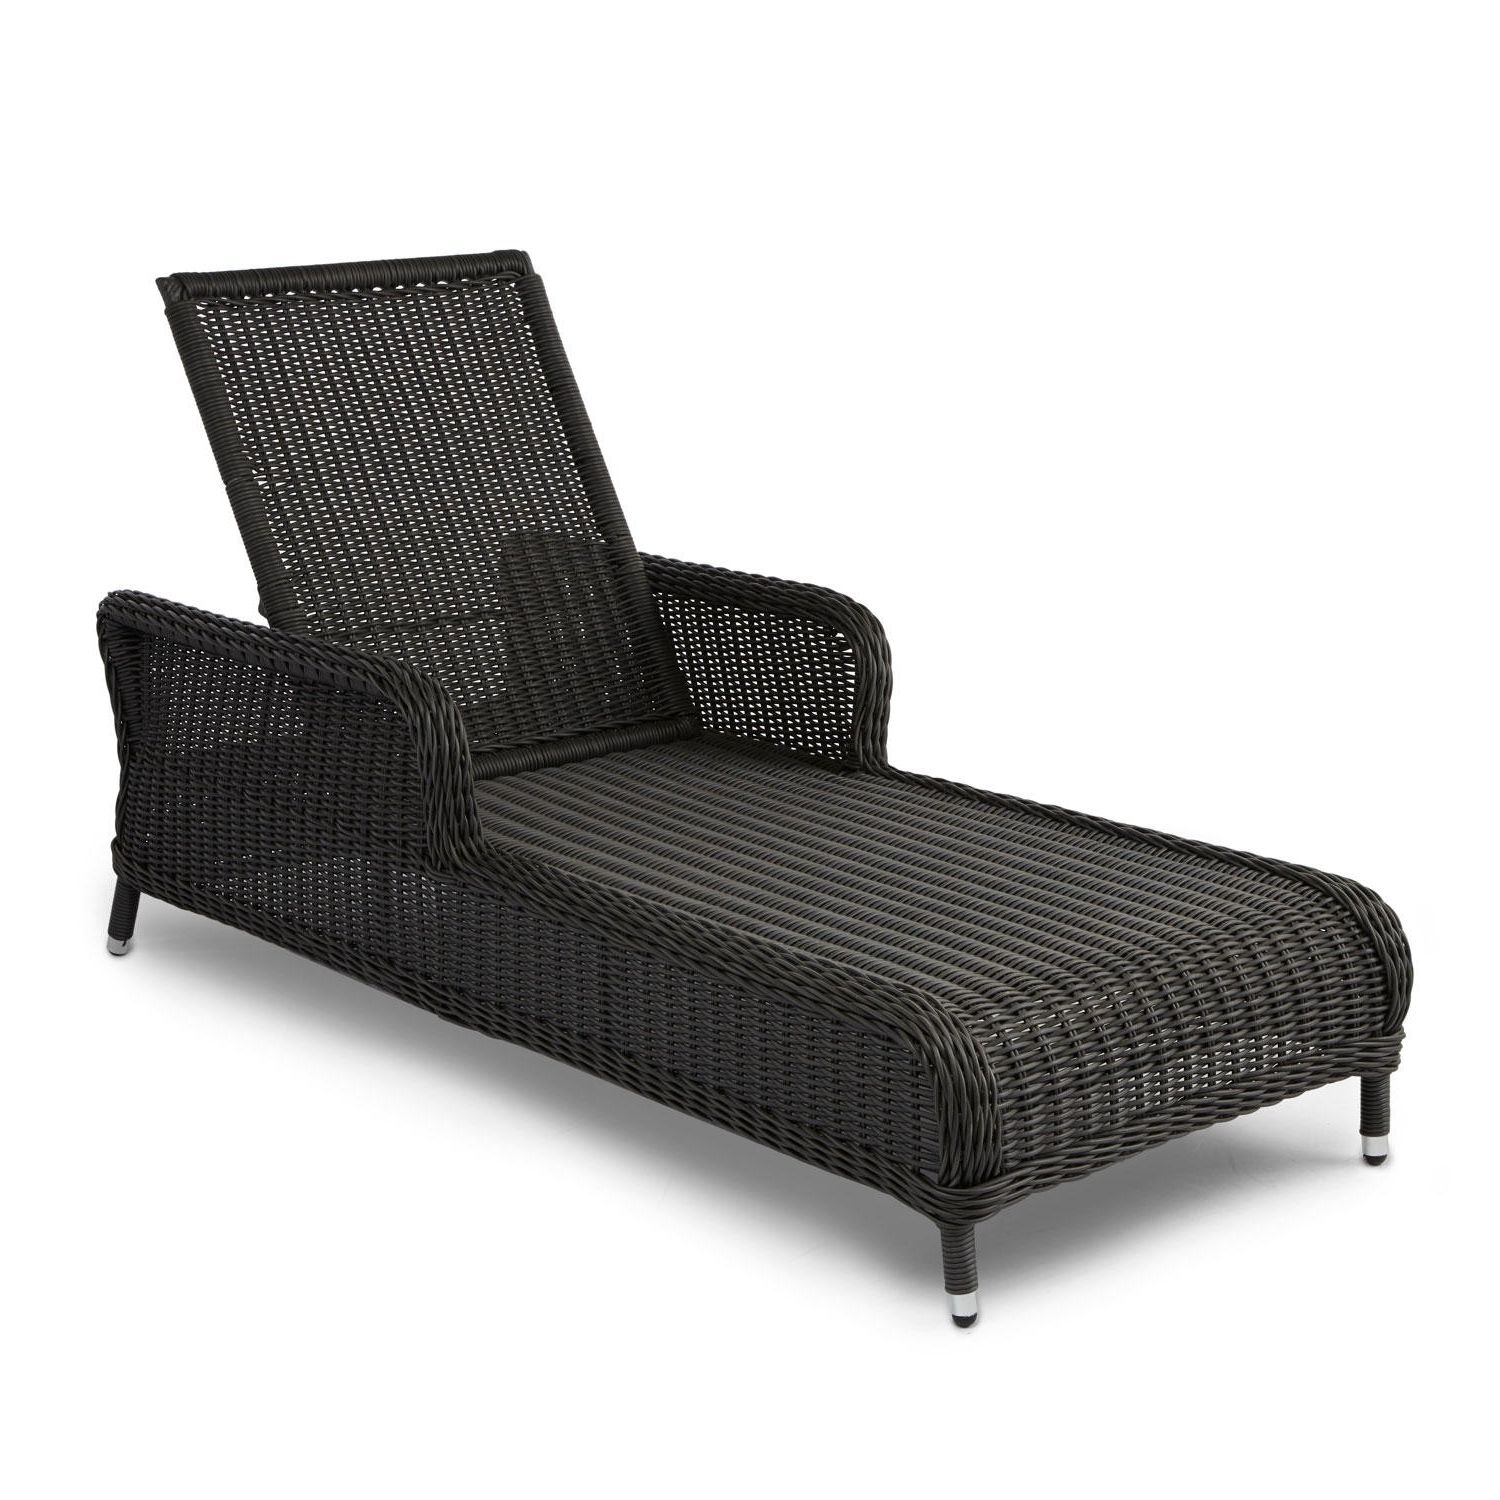 Best And Newest Wicker Outdoor Chaise Lounges With Regard To Outdoor : Zero Gravity Lounge Chair Outdoor Chaise Lounges (View 9 of 15)